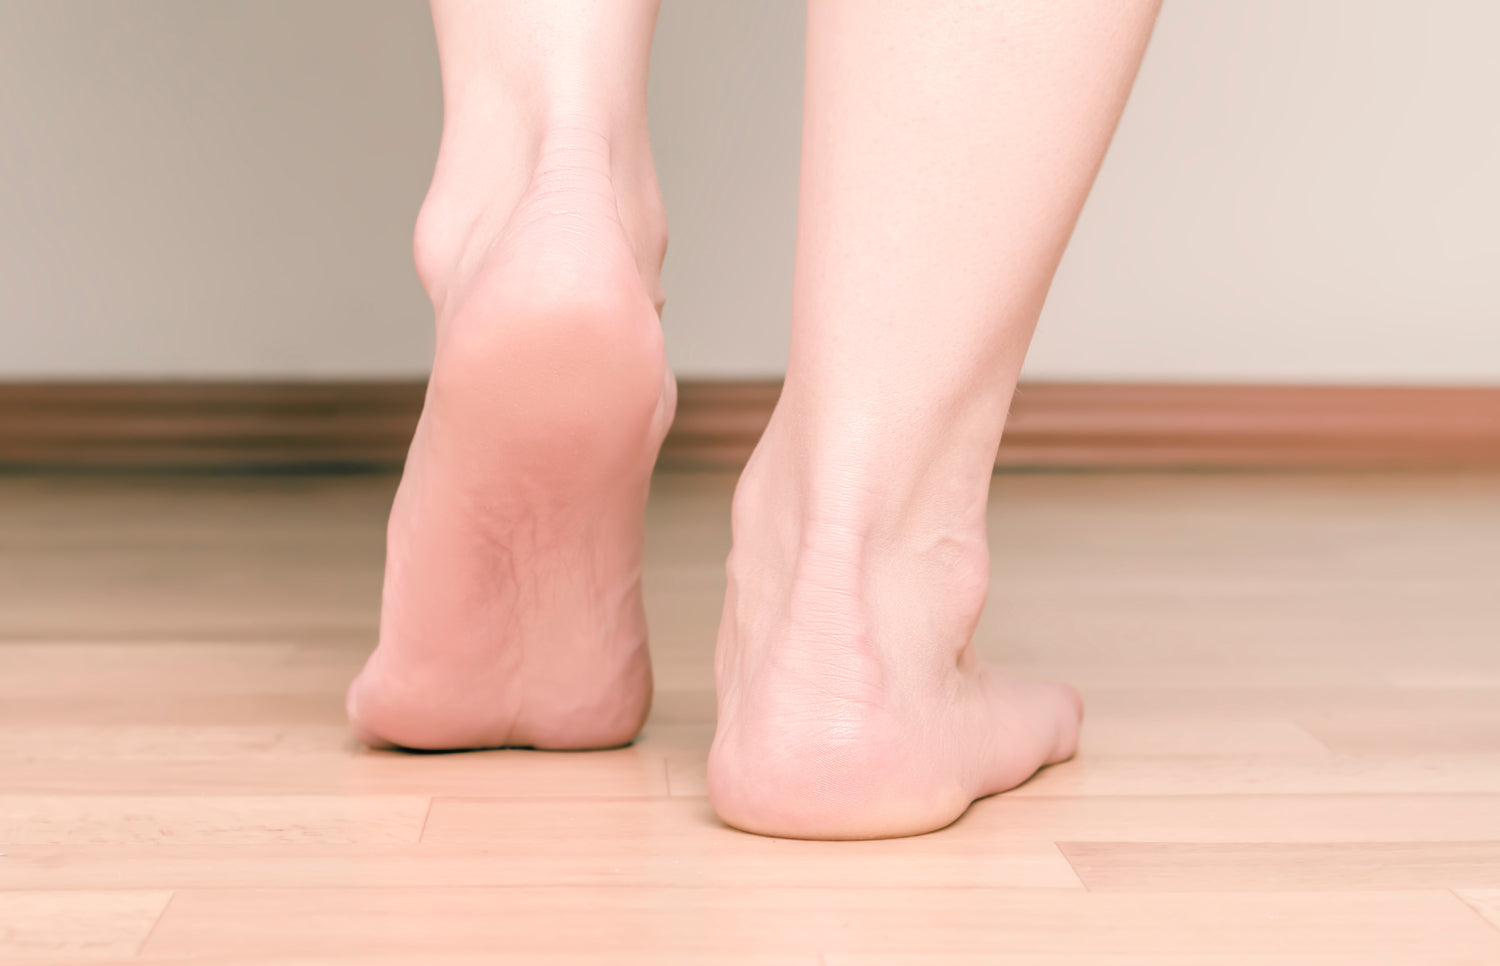 What kind of flat feet do I have and how can I make them flexible